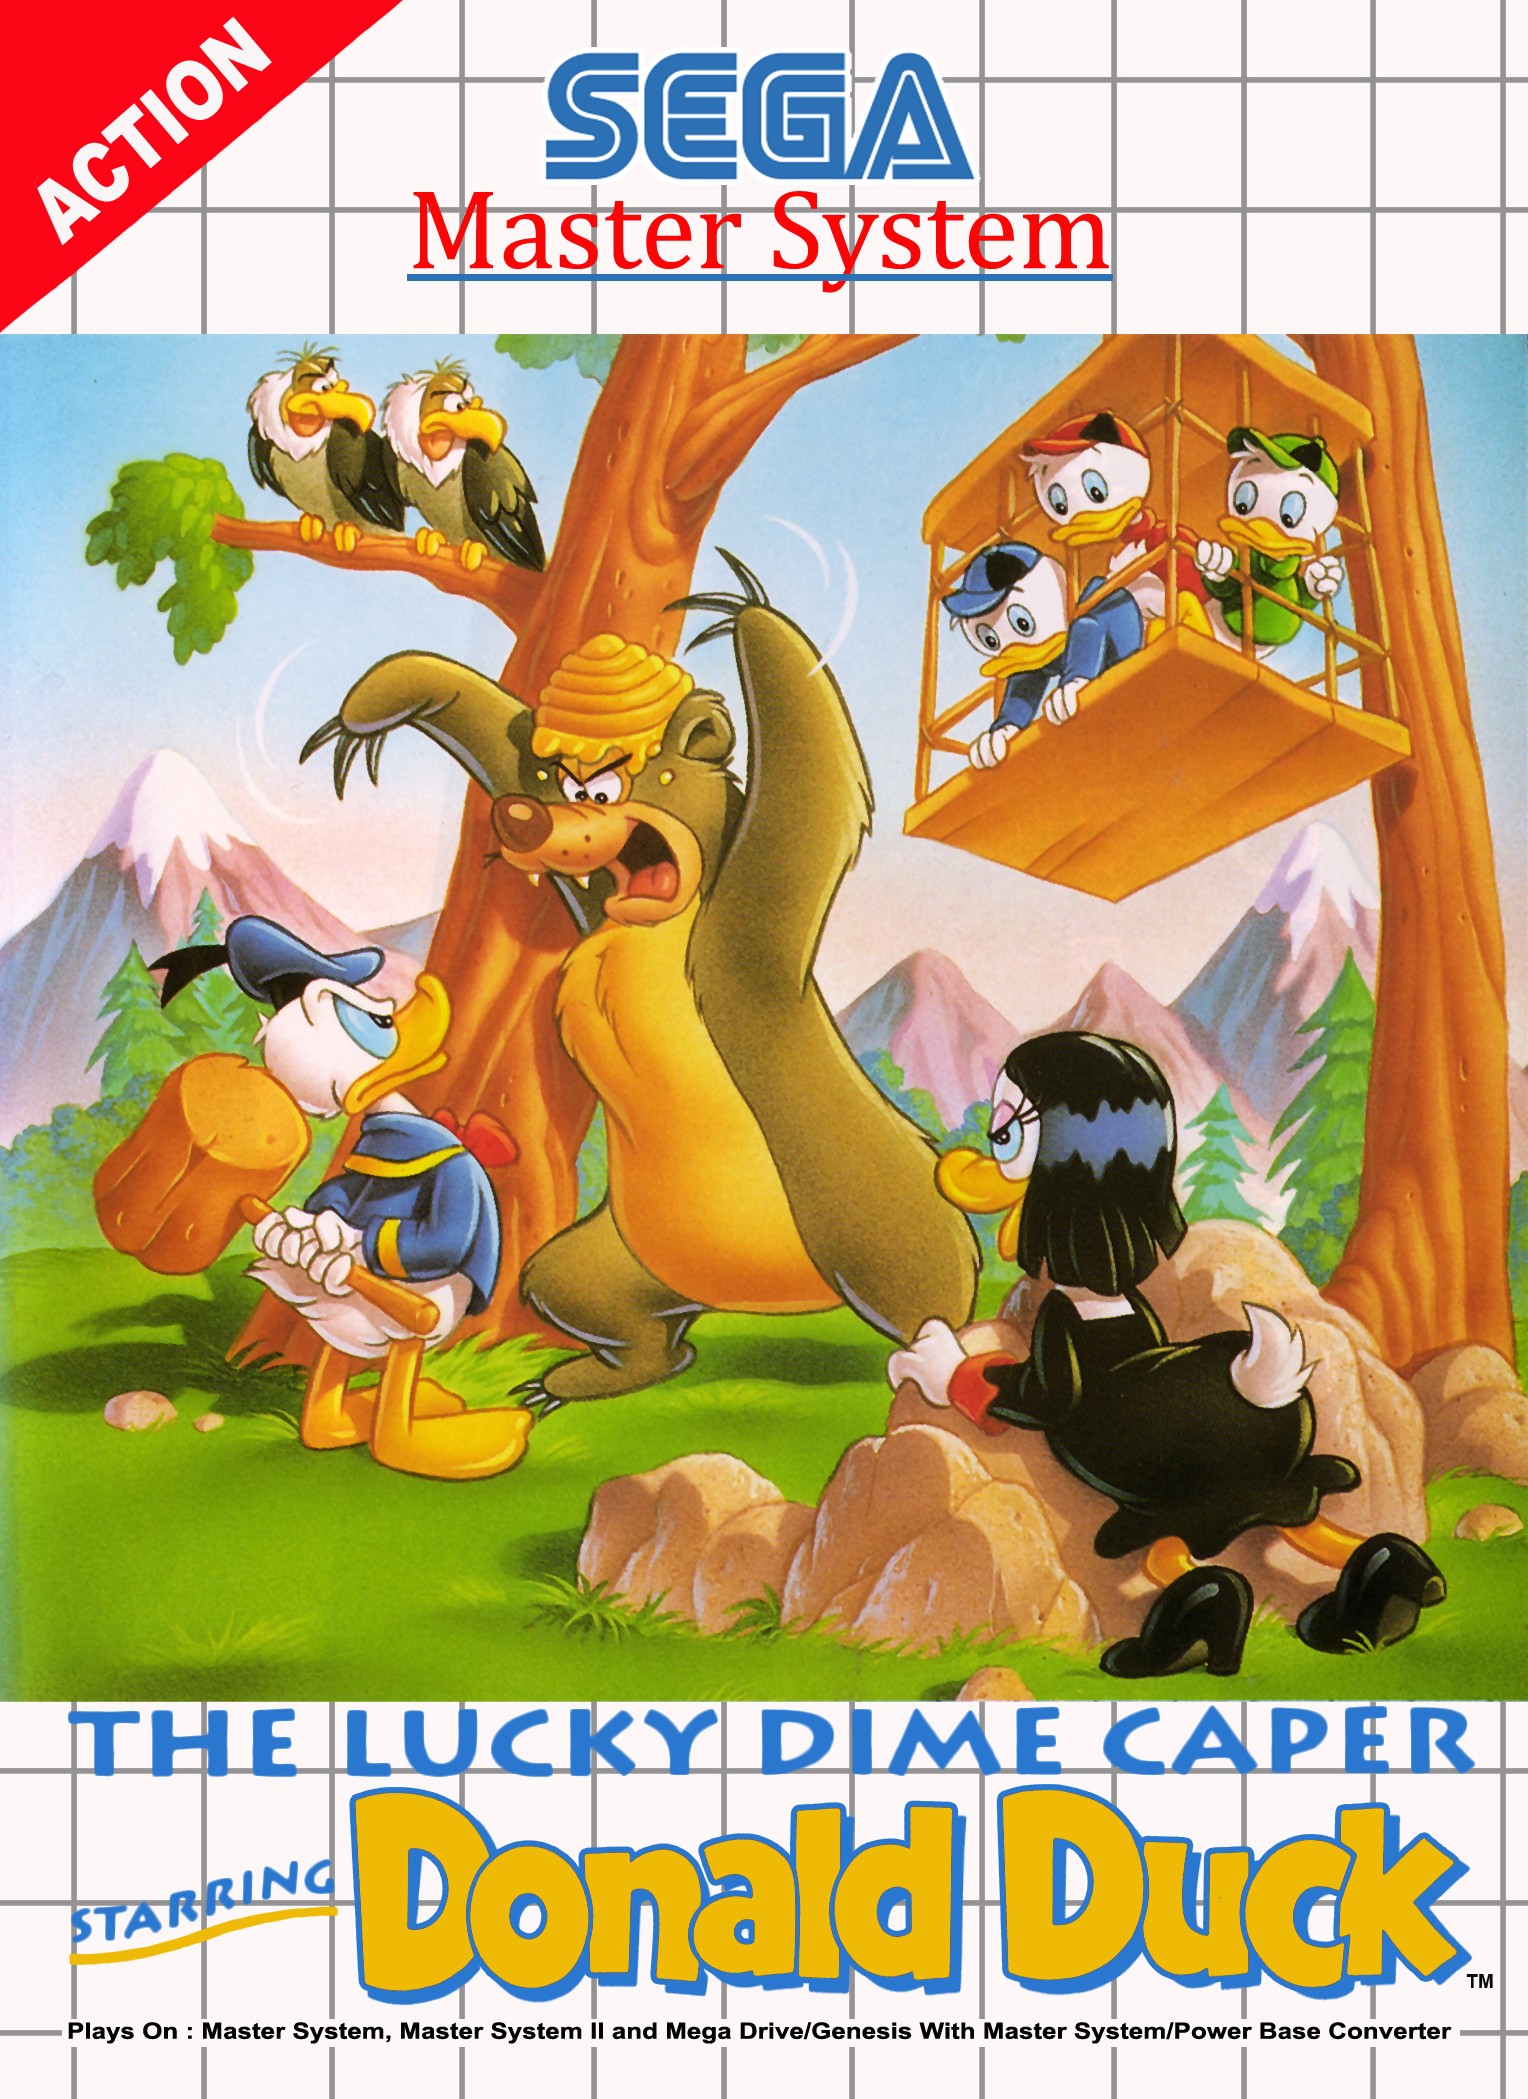 'The Lucky Dime Caper starring Donald Duck'